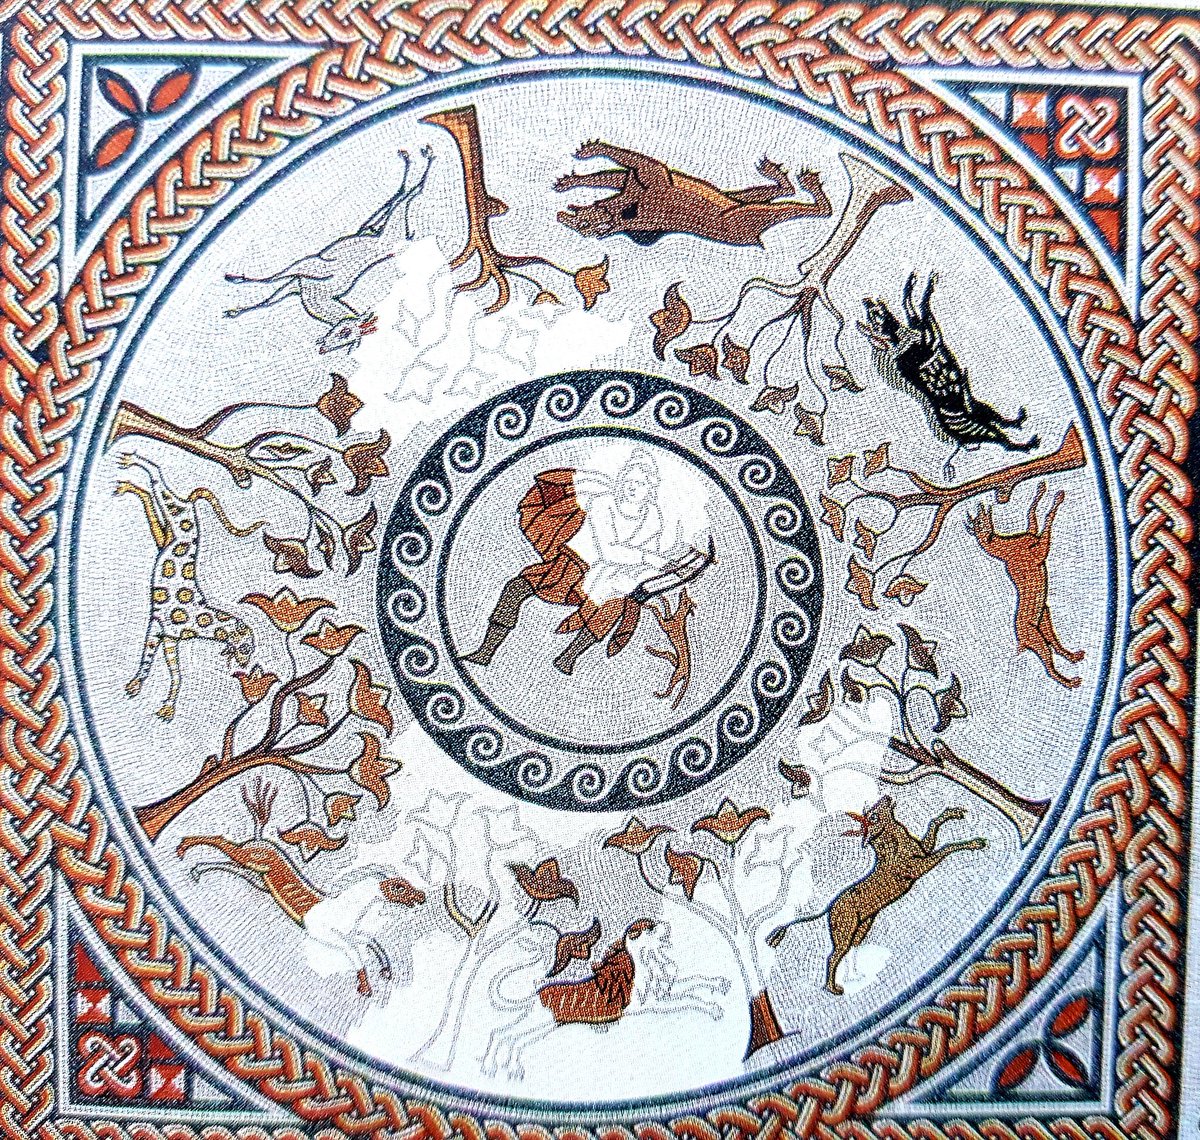 The E panel of the main mosaic at Withington had a lively depiction of Orpheus playing a lyre to a foxAround, a host of animals comprising a lion bull dog boar bear deer leopard and horse dance / chase each otherWhen exposed, this floor was almost complete... #MosaicMonday